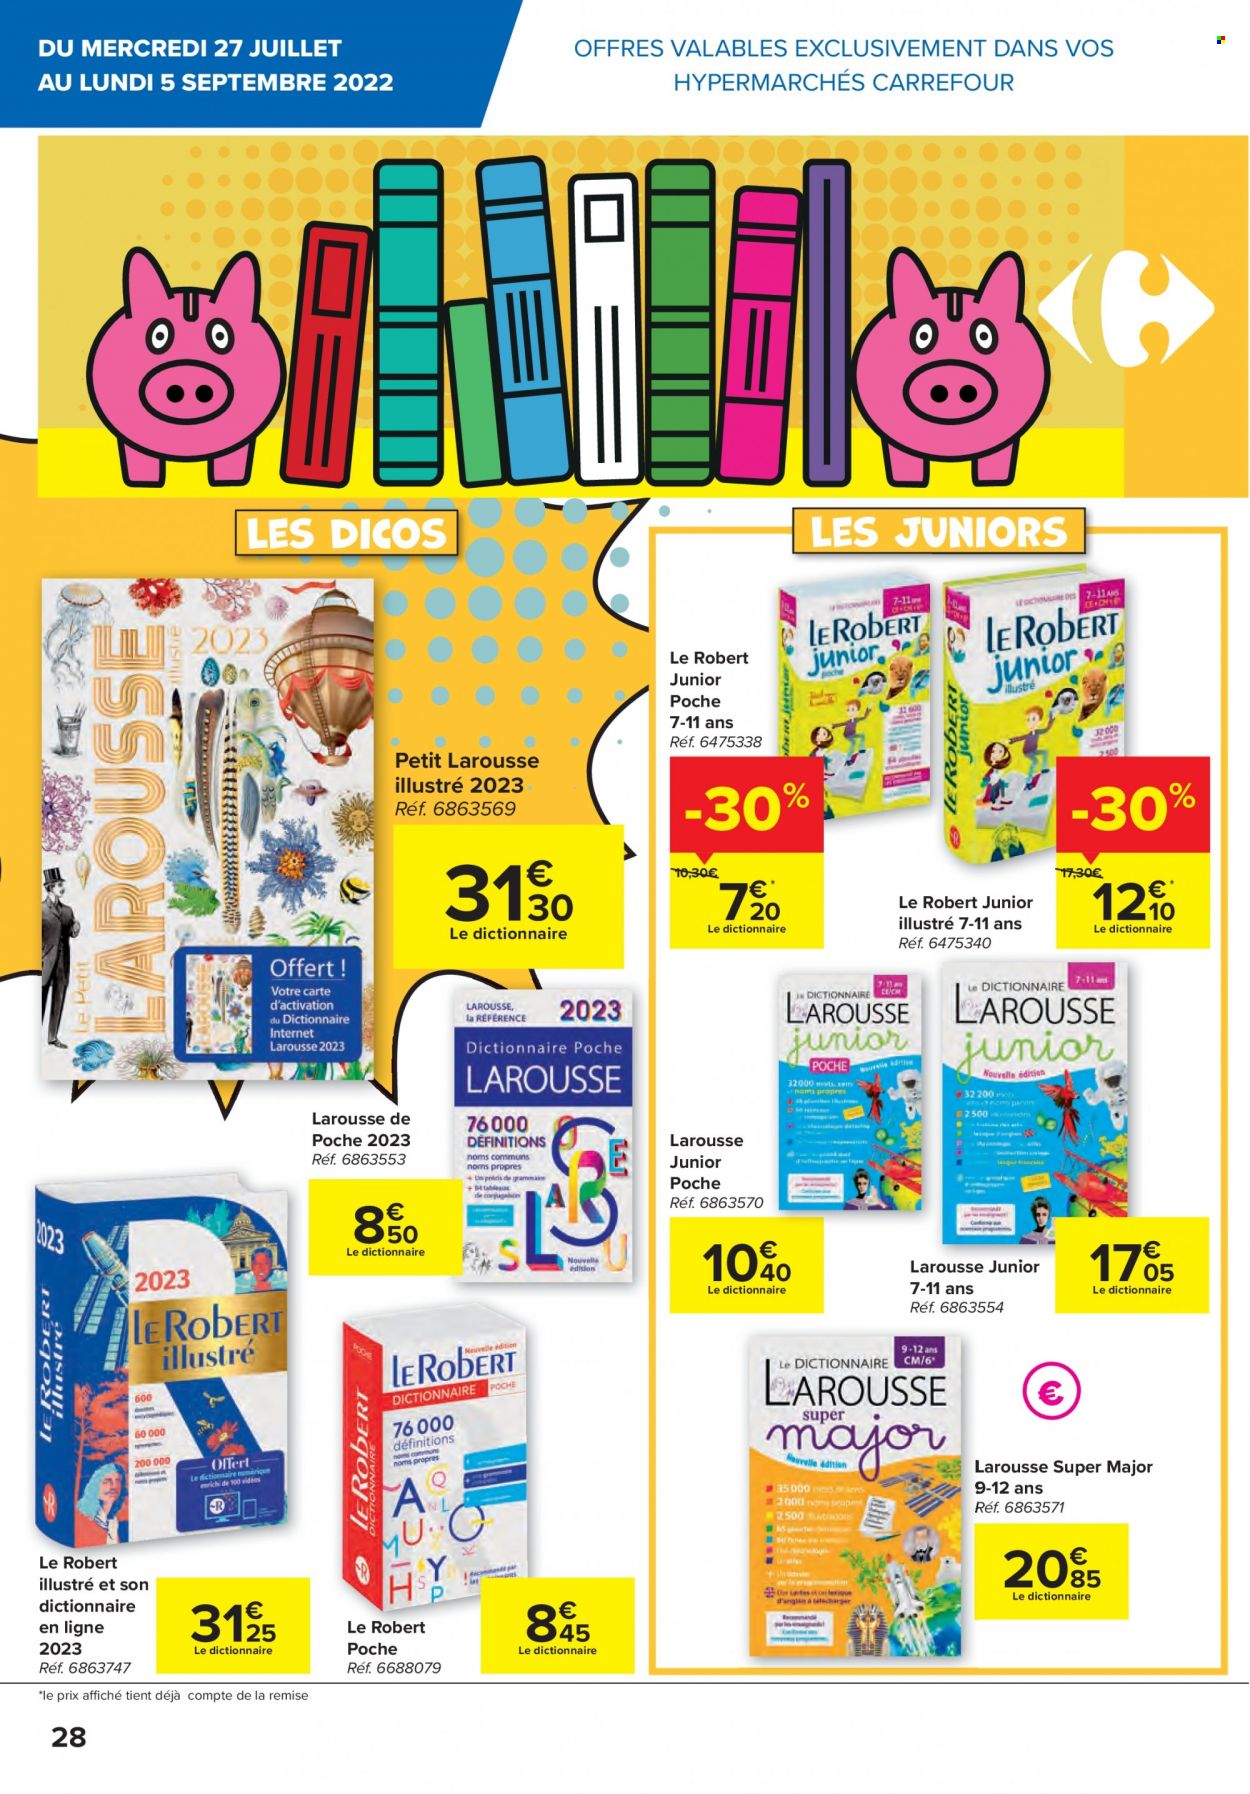 Catalogue Carrefour hypermarkt - 27.7.2022 - 5.9.2022. Page 28.